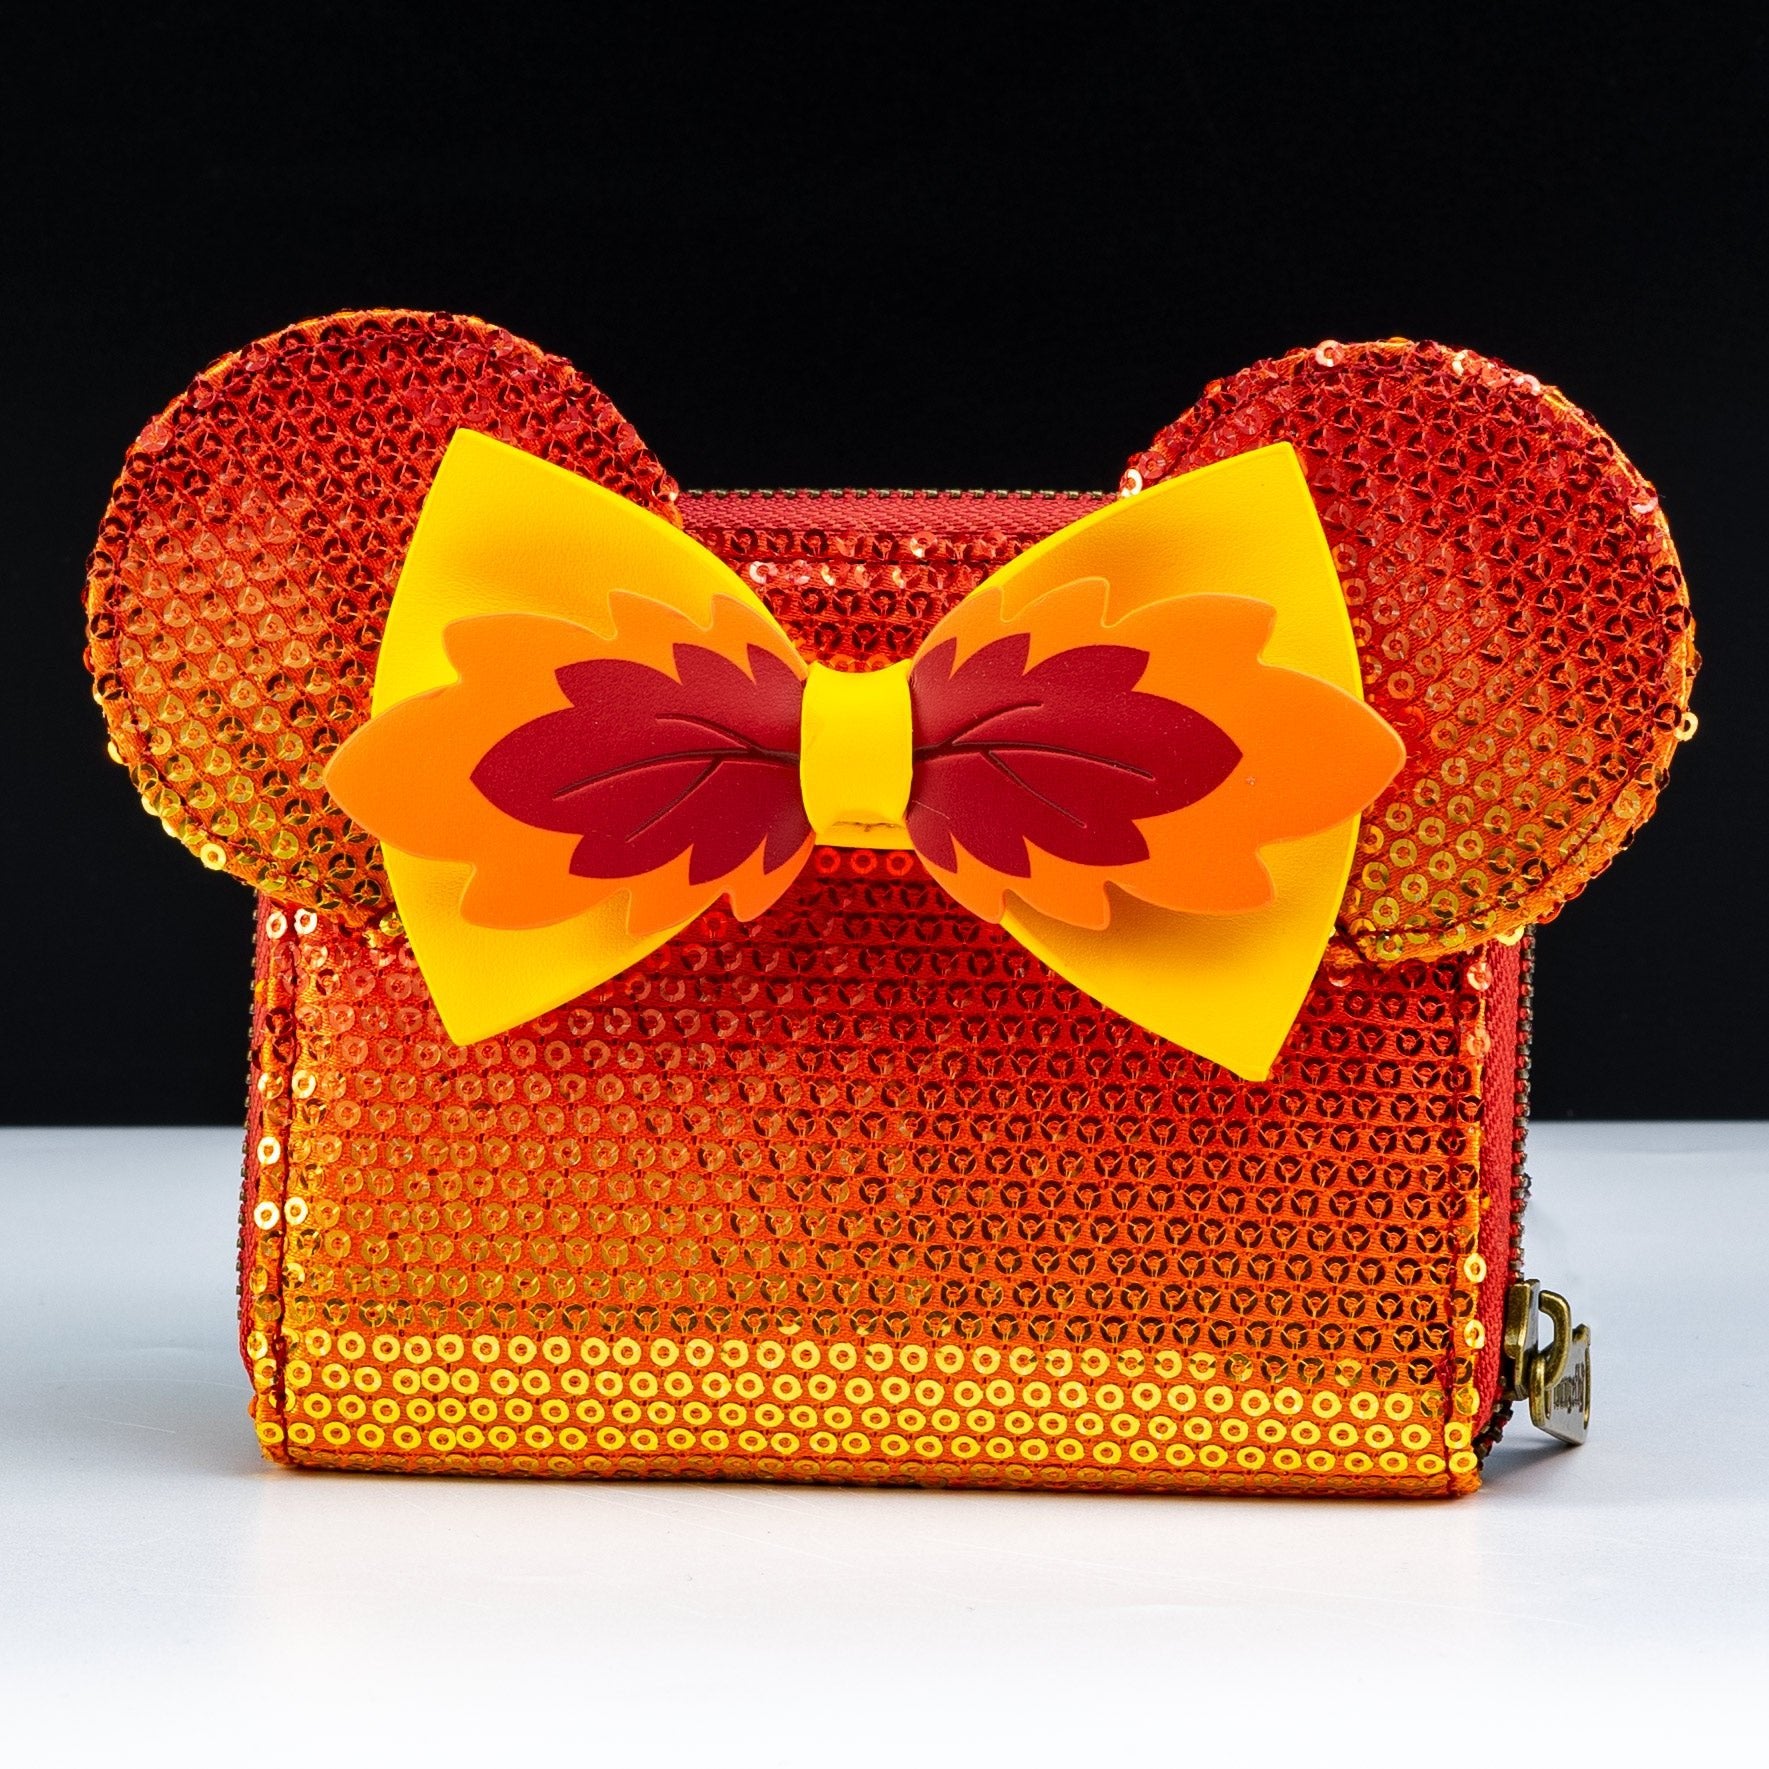 Loungefly x Disney Minnie Mouse Sequin Fall Ombre Wallet - GeekCore